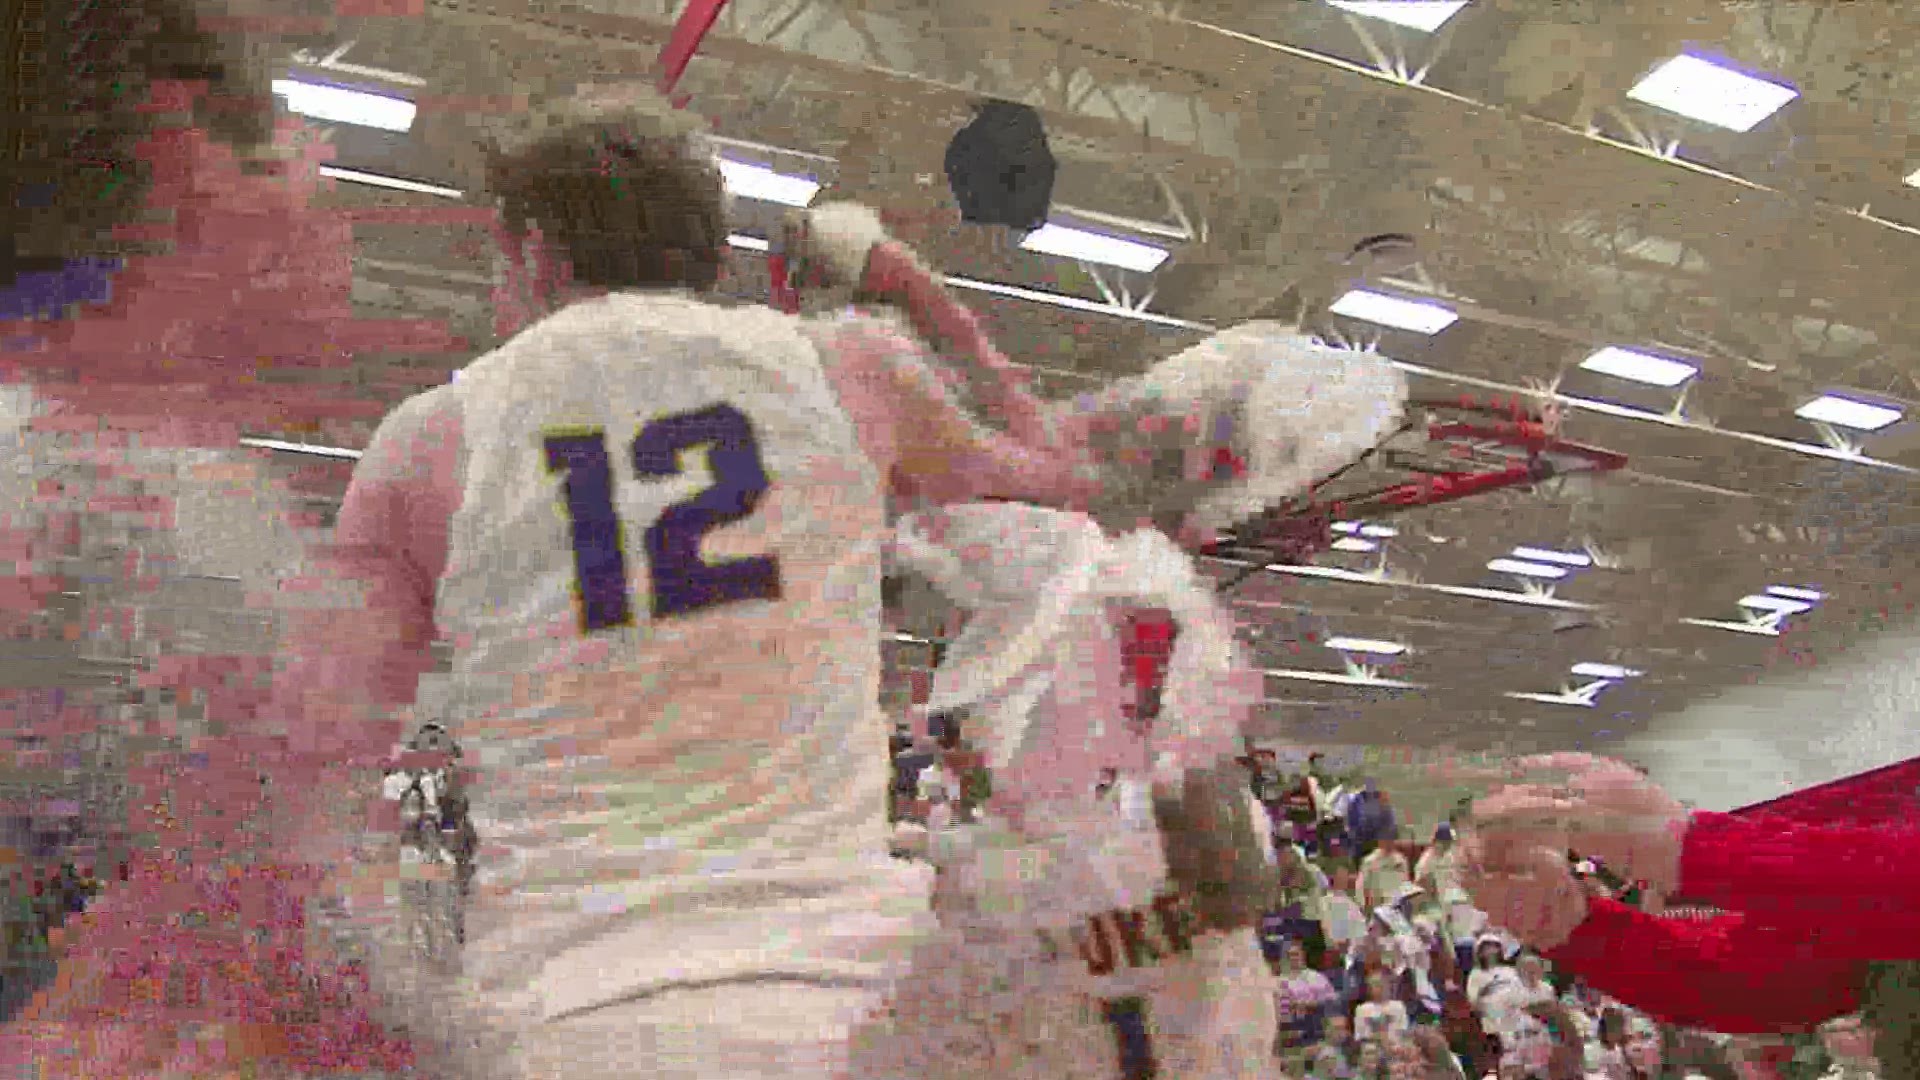 Waukee and WDM Valley went toe-to-toe in a 4A Boys Basketball Substate Final that lived up to the hype. Warriors are on to State with a 59-55 win.